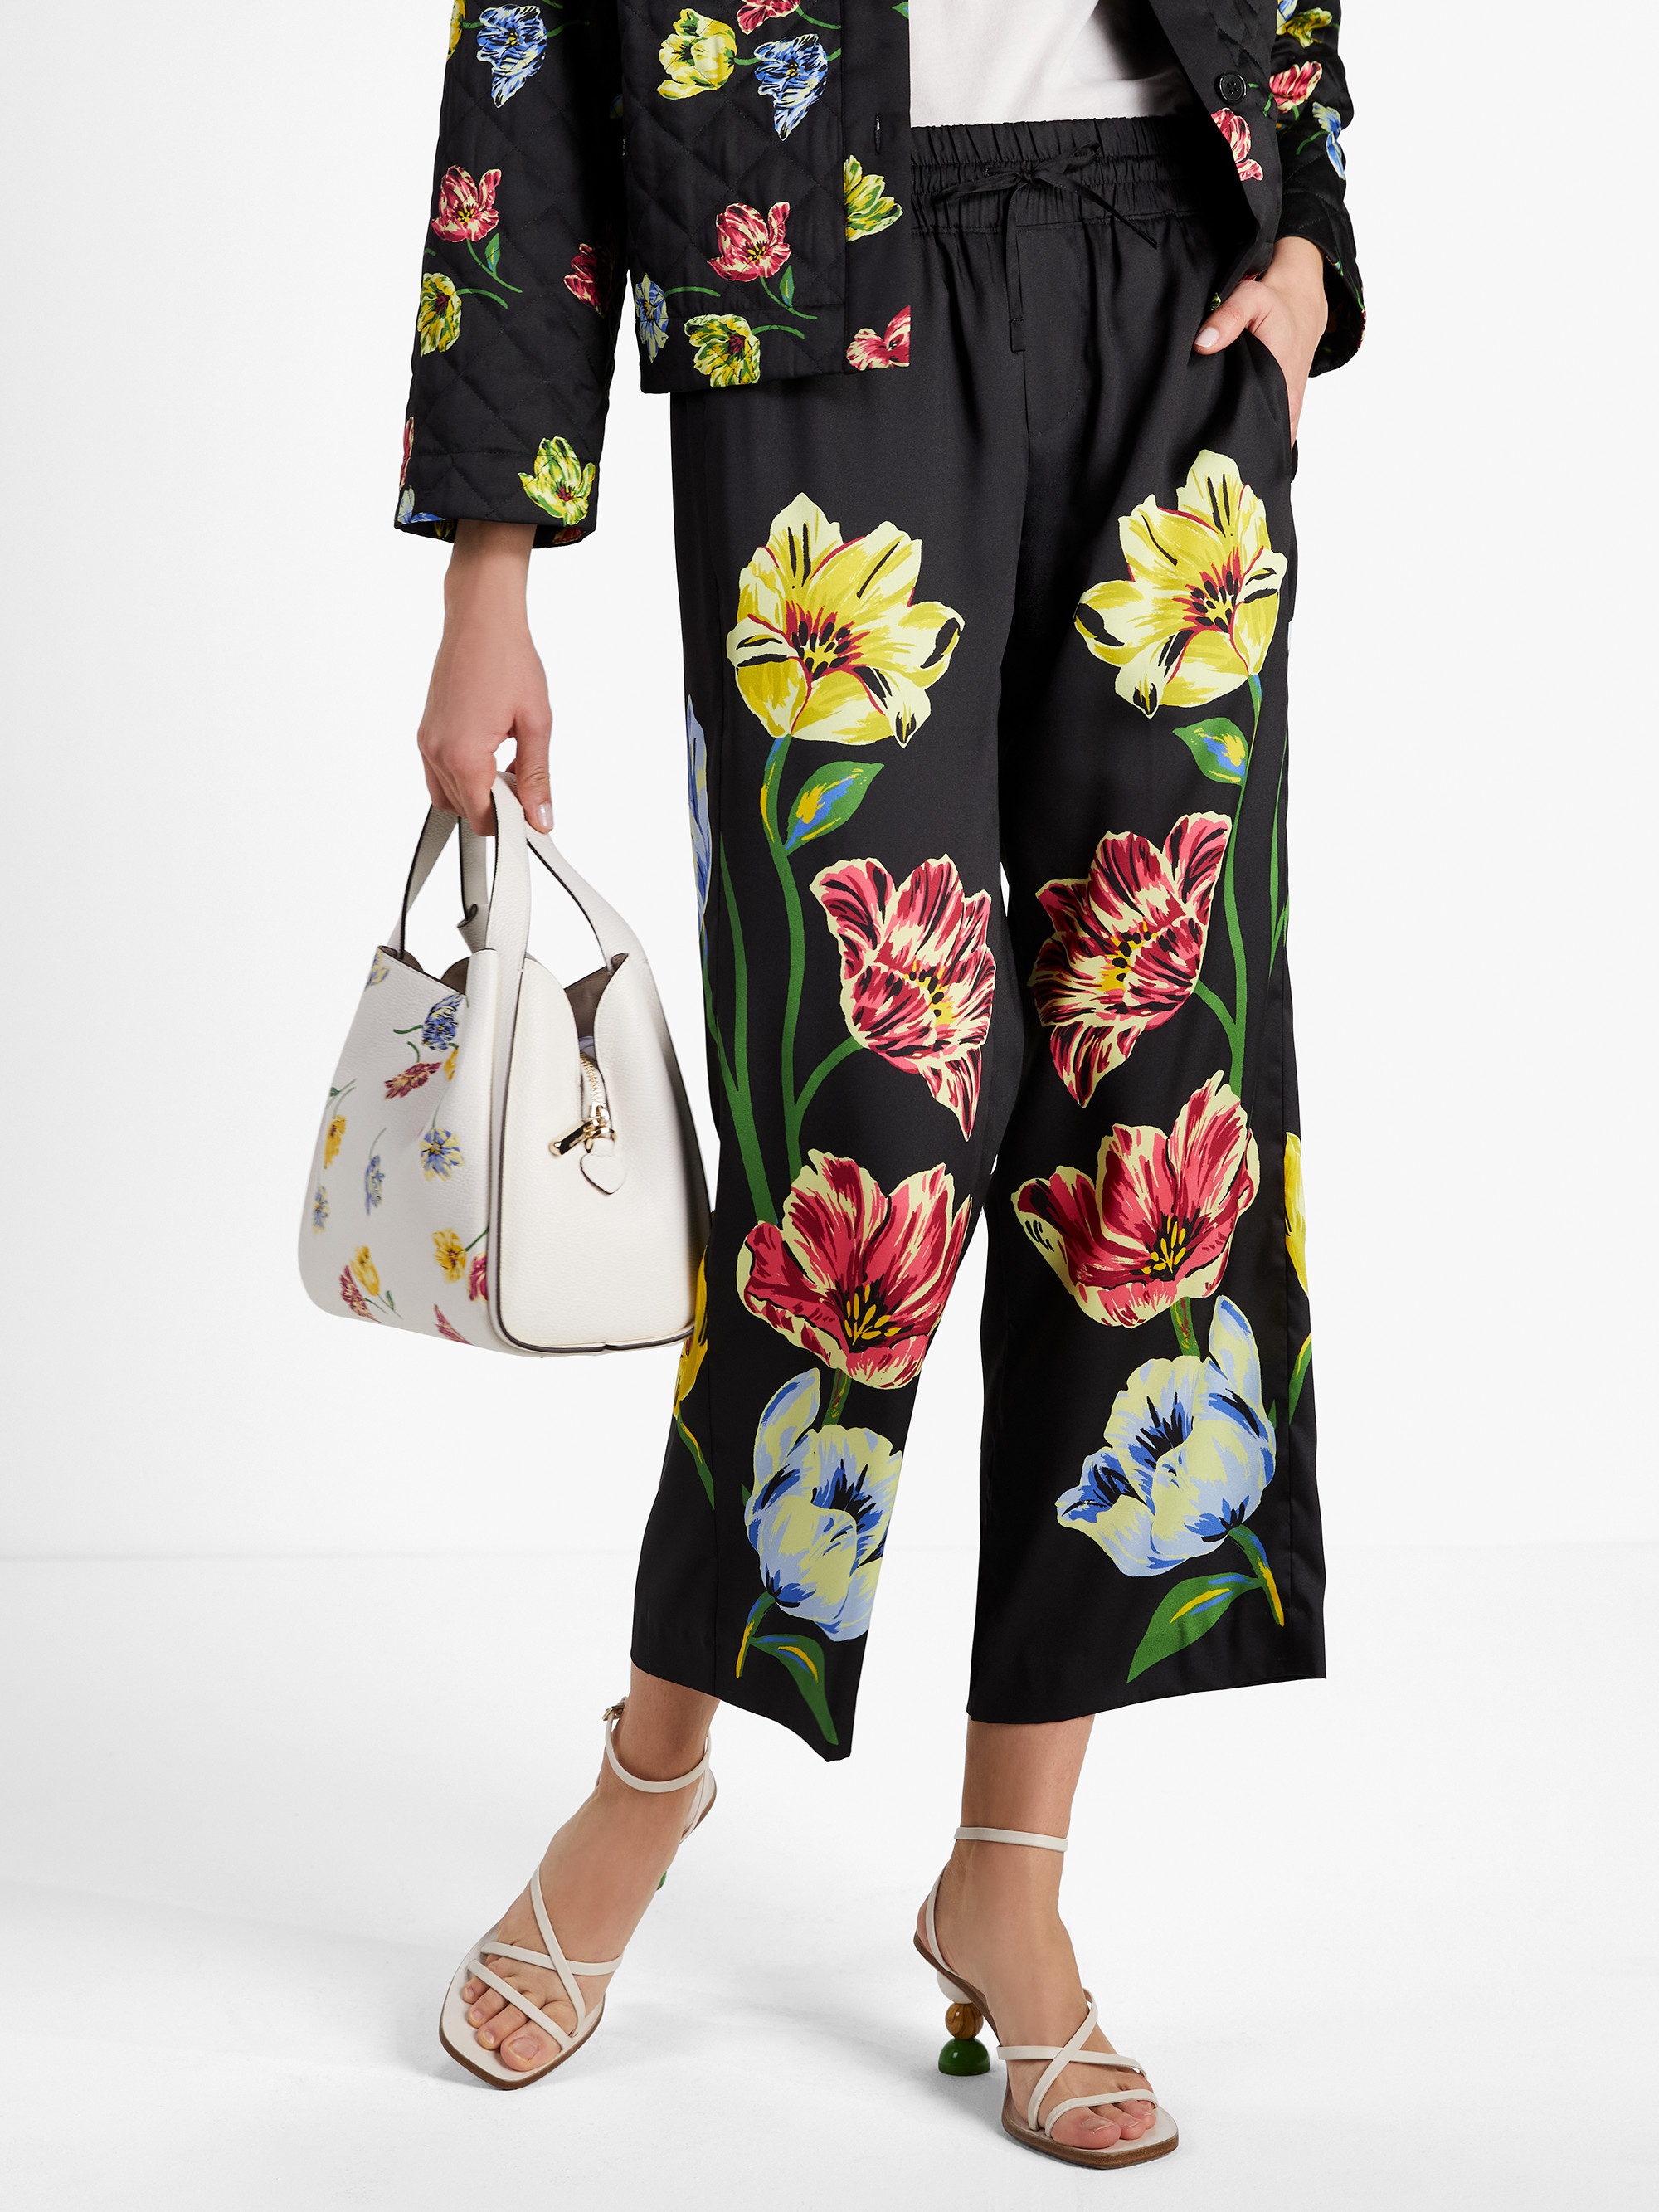 Kate Spade Placed Floral Pants